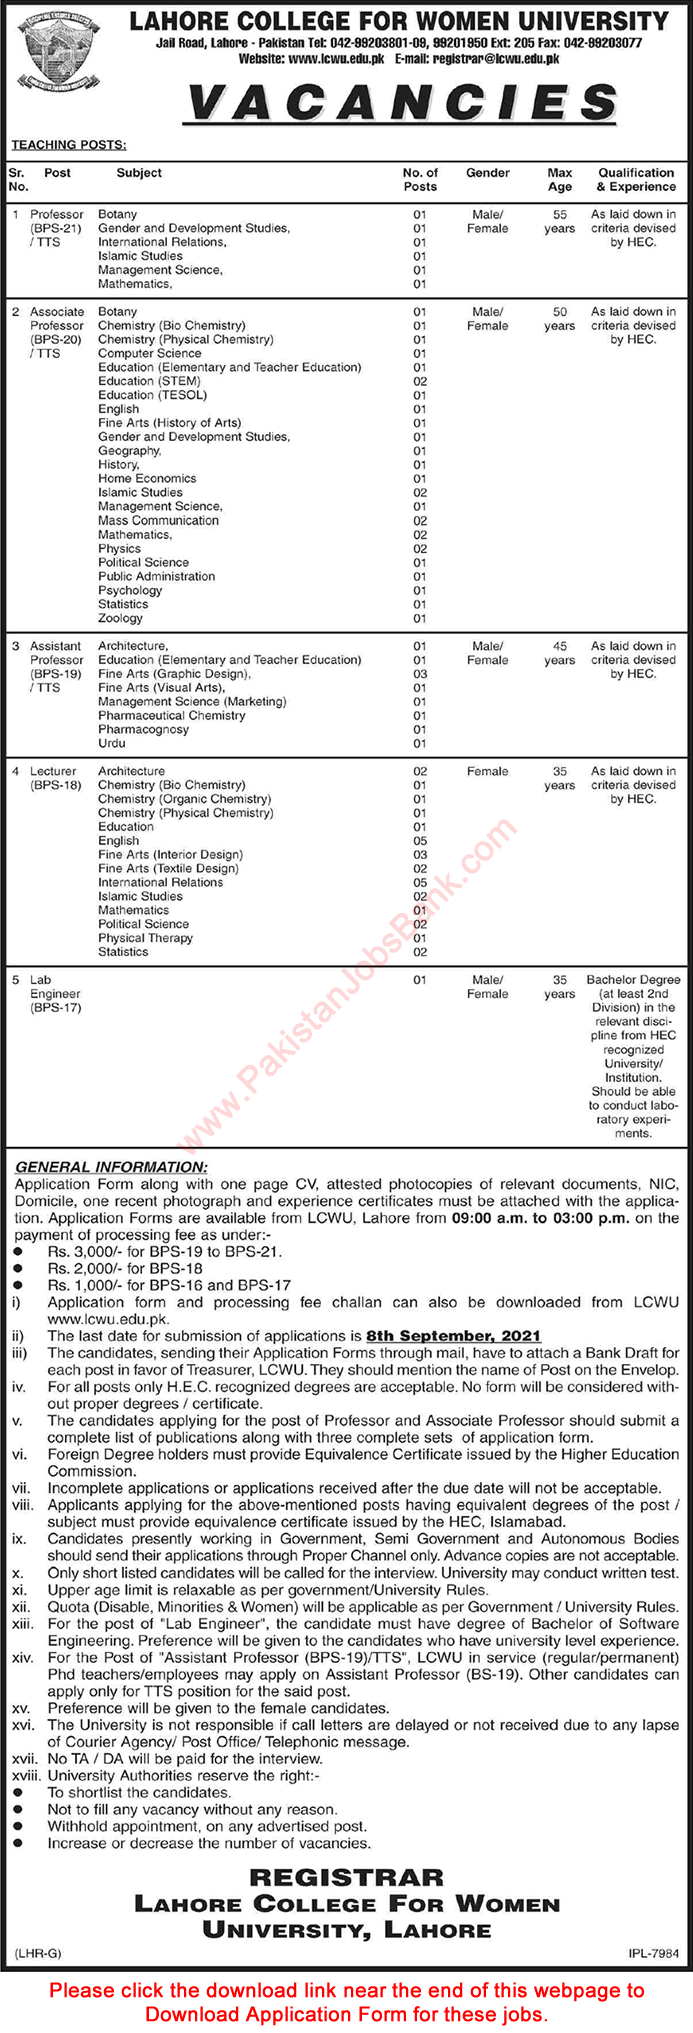 Lahore College for Women University Jobs August 2021 LCWU Application Form Teaching Faculty & Lab Engineer Latest